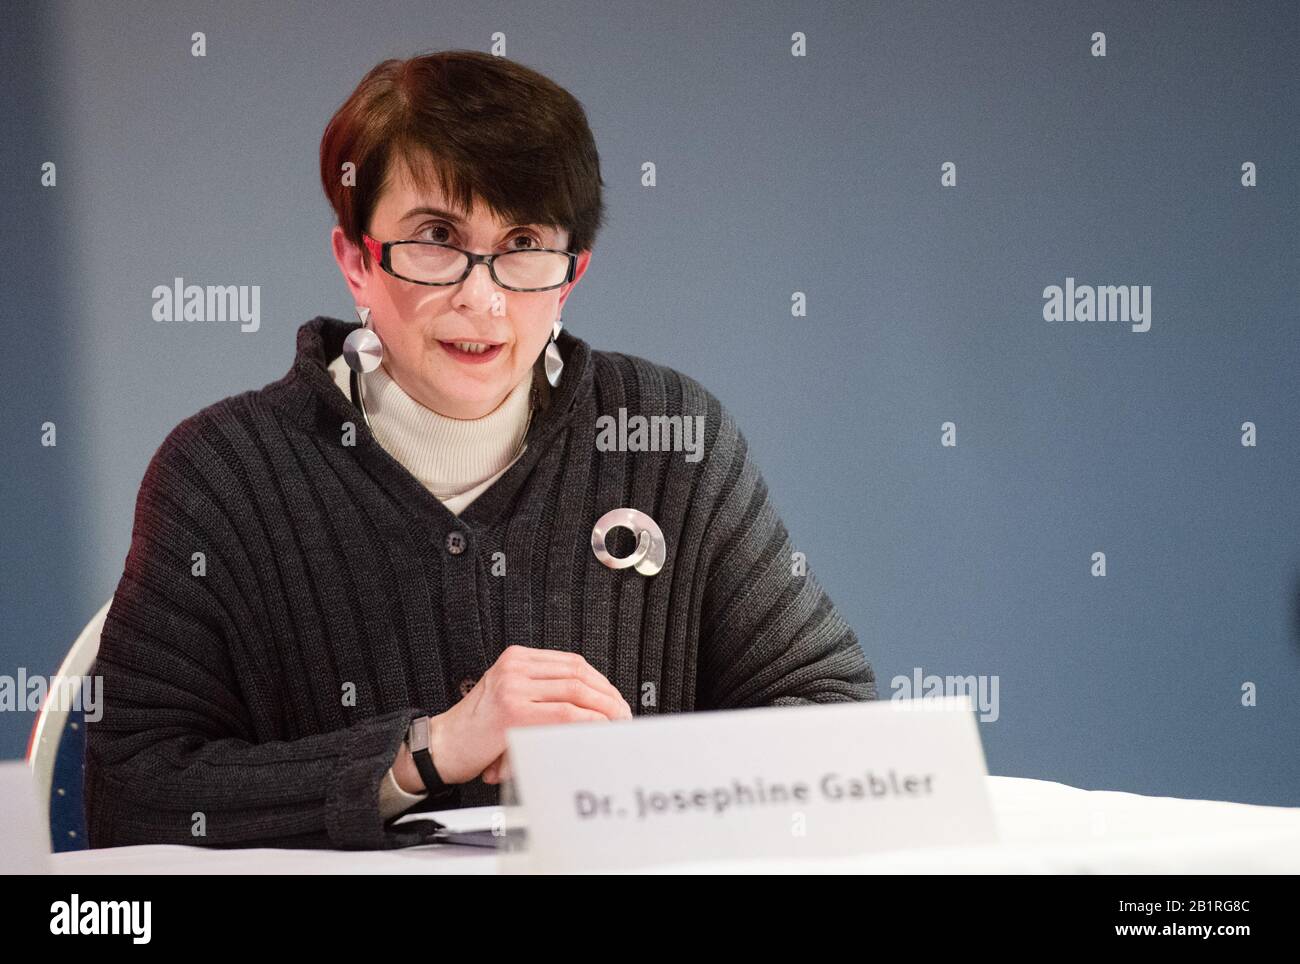 27 February 2020, Berlin: Josephine Gabler, director of the Käthe Kollwitz Museum, speaks at a press conference on the new location of the museum. The museum will move into the representative theatre building of Charlottenburg Palace in 2022. Photo: Christophe Gateau/dpa Stock Photo